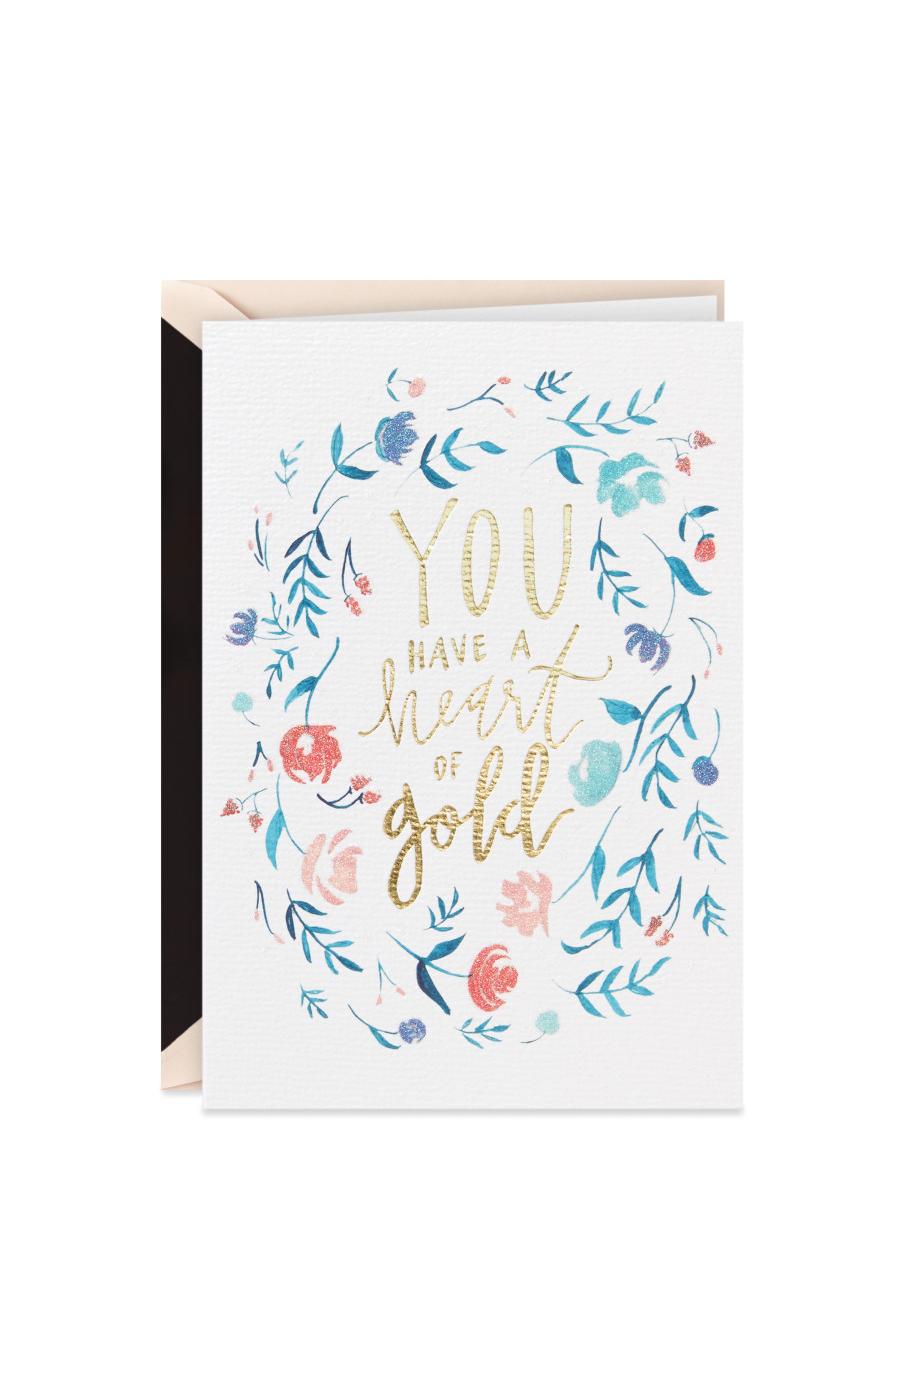 Hallmark Signature Heart of Gold Floral Wreath Thank You Greeting Card - E71; image 1 of 6